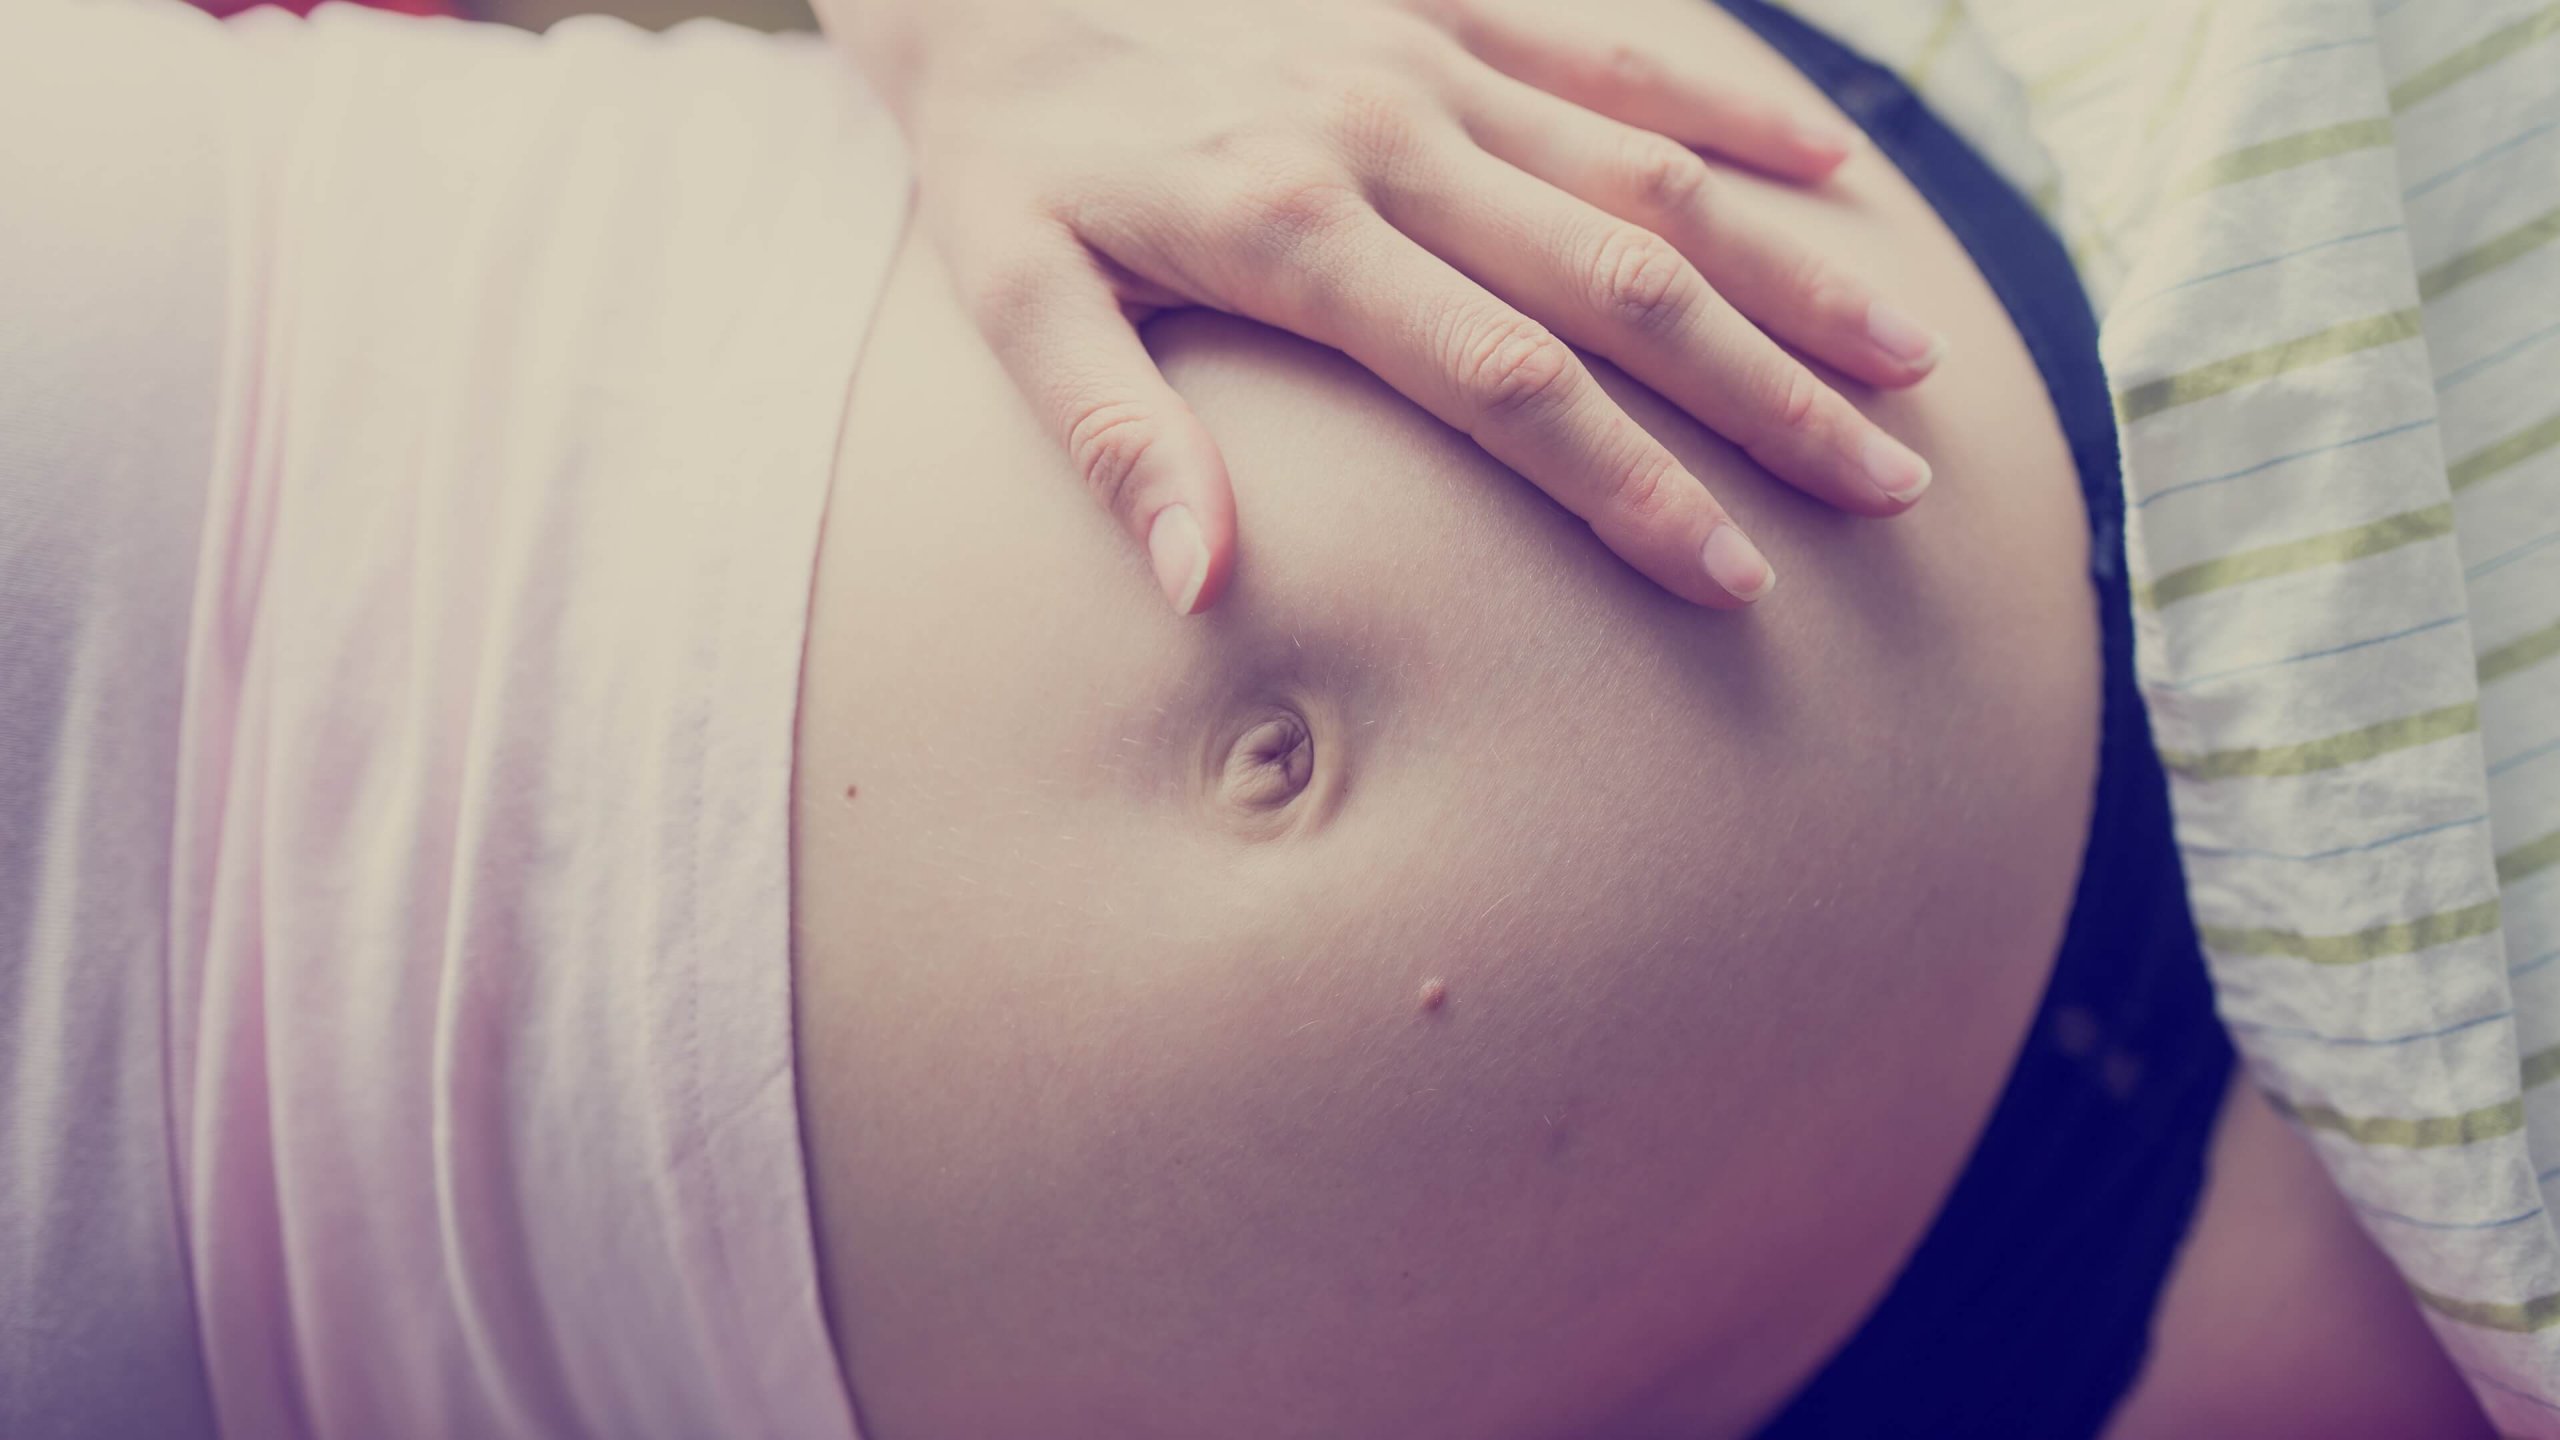 Perineal massage may help you avoid pain and tears to your perineum during childbirth. Here's how to do it, step by step, with video and photo guides.